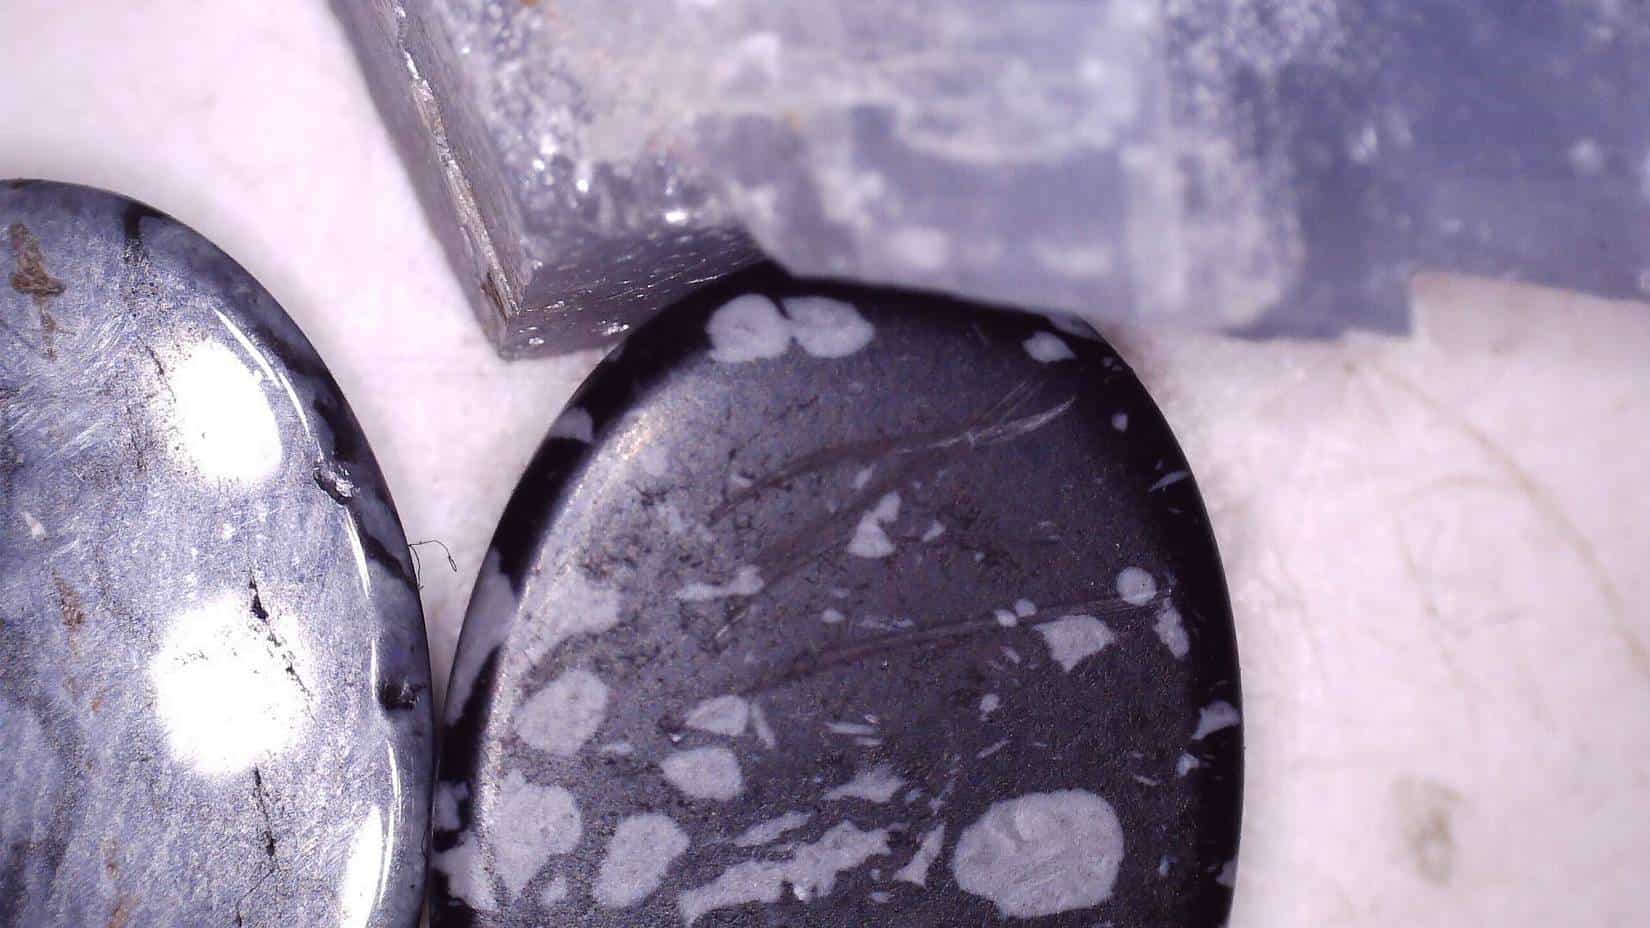 Scratched by Calcite, showing a Mohs hardness of less than 3.